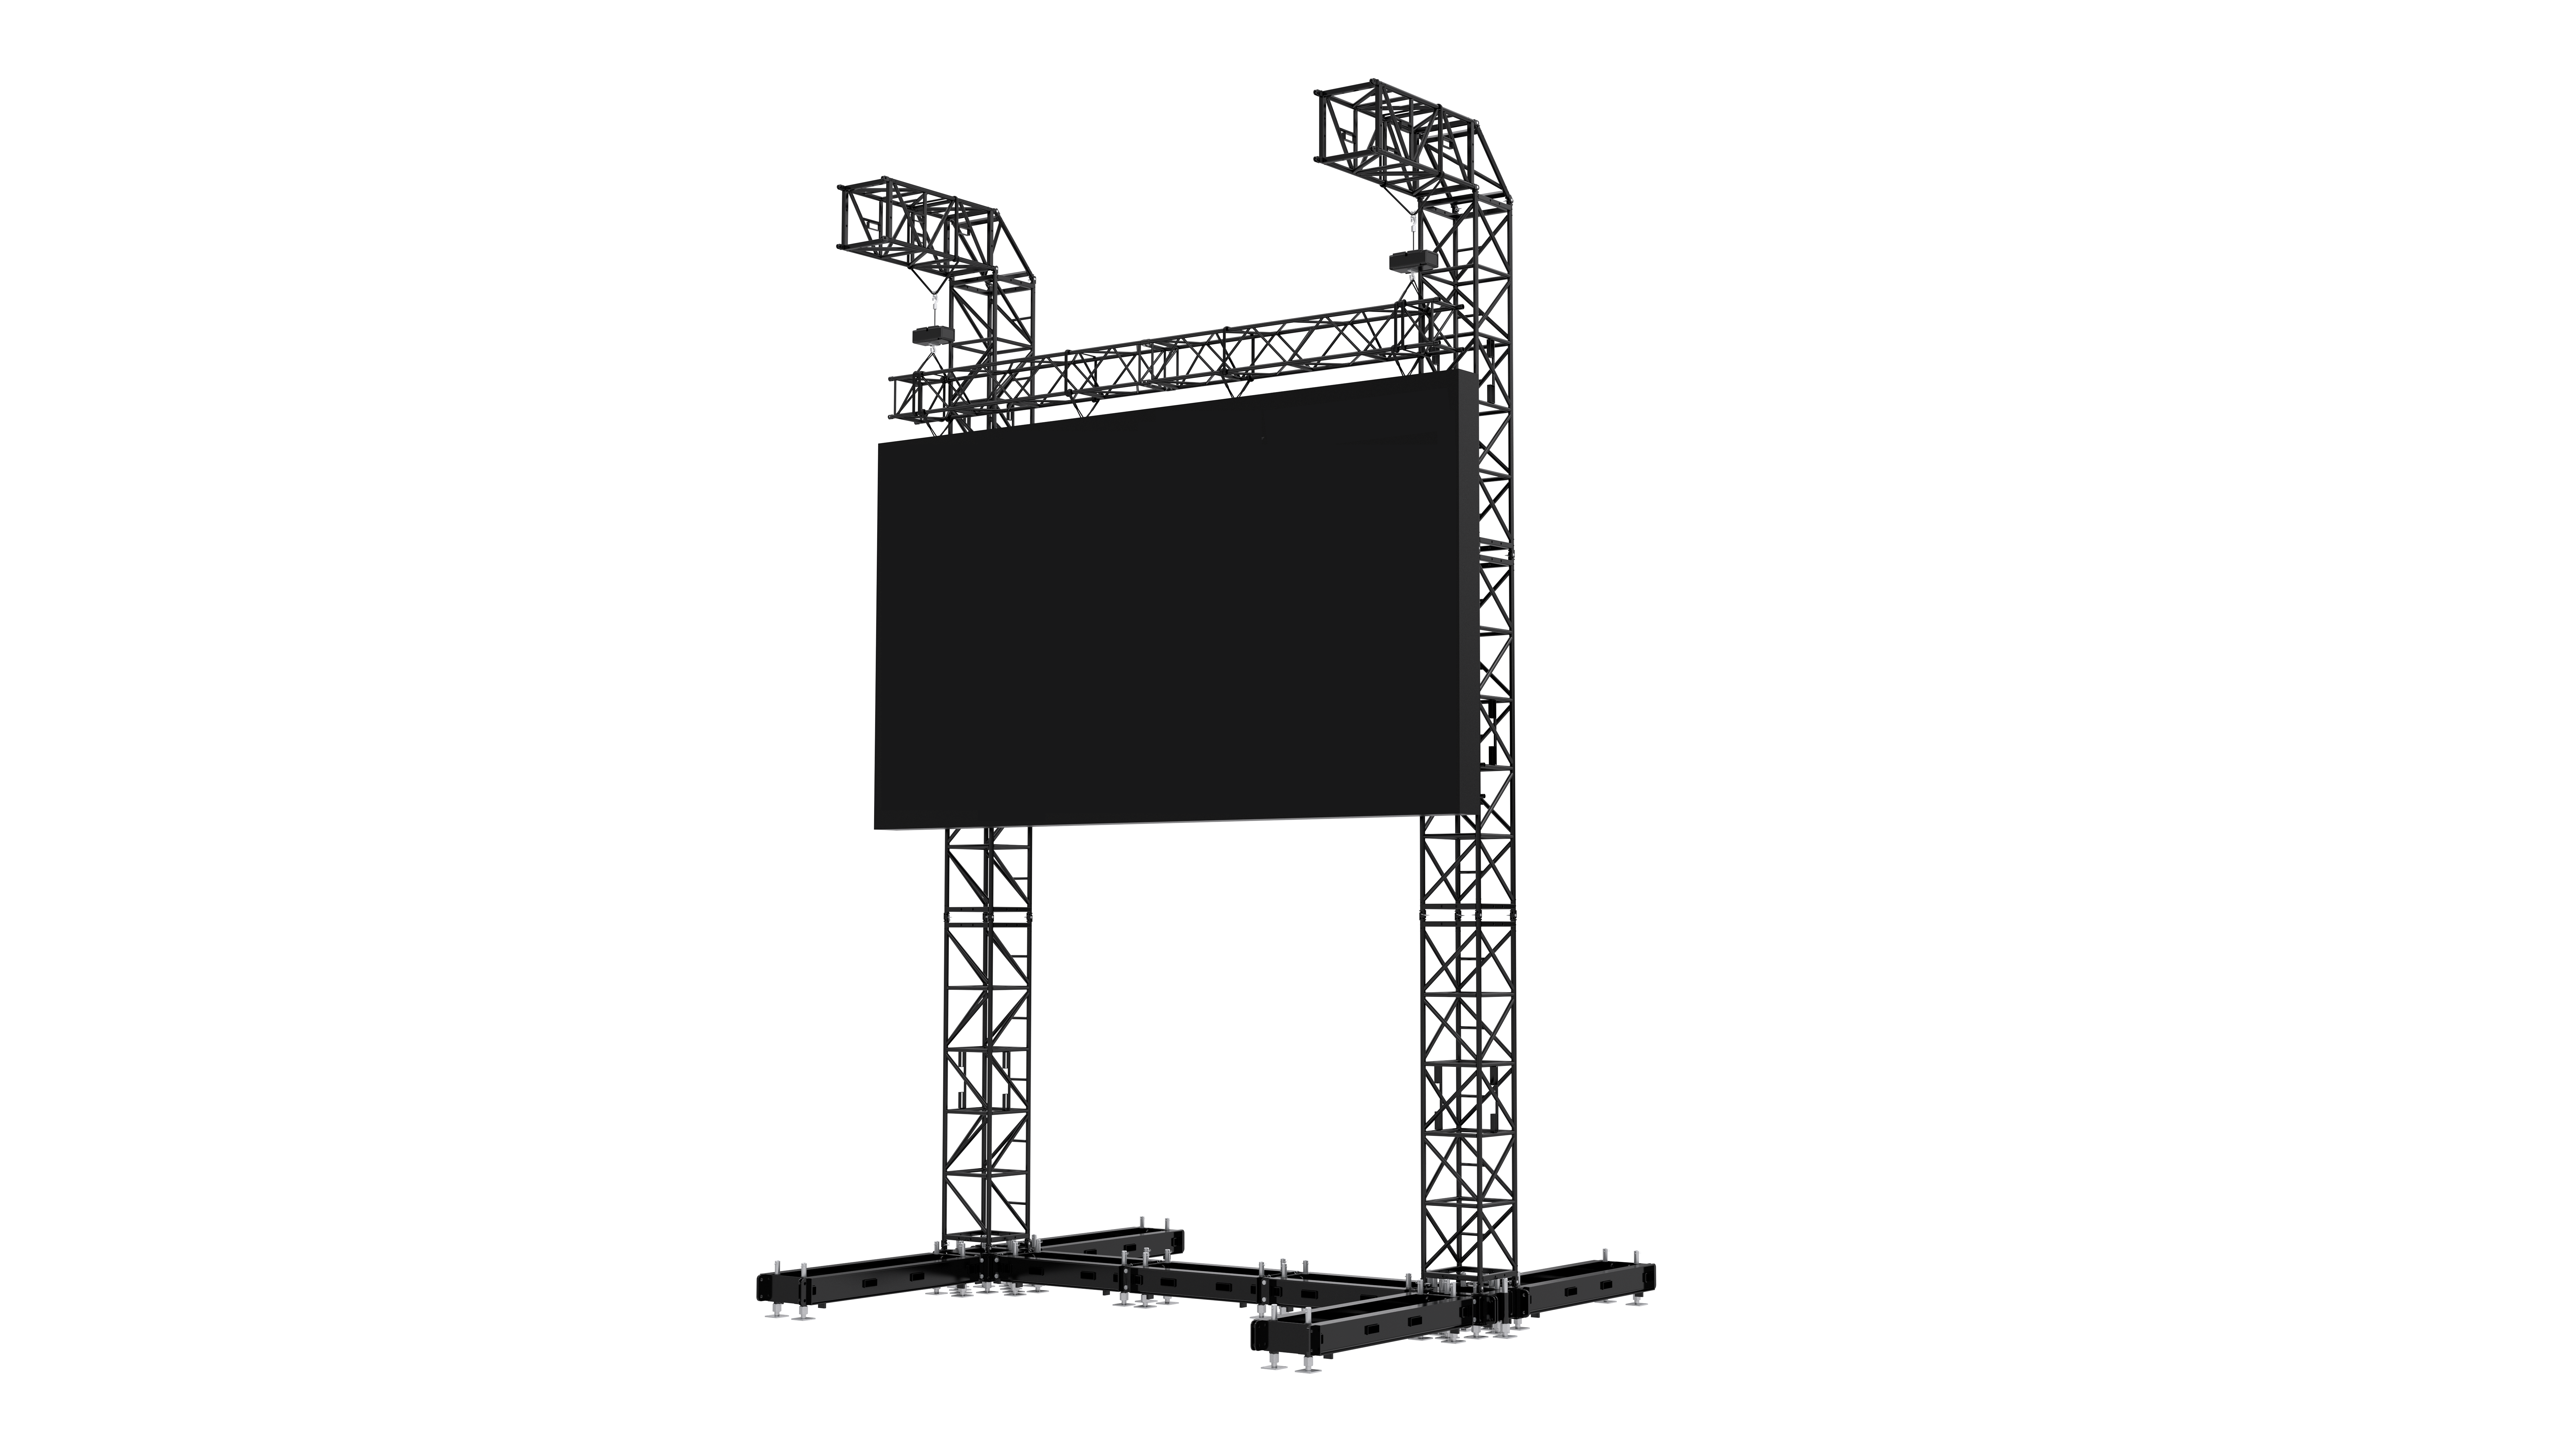 Support for the largest and heaviest LED screens